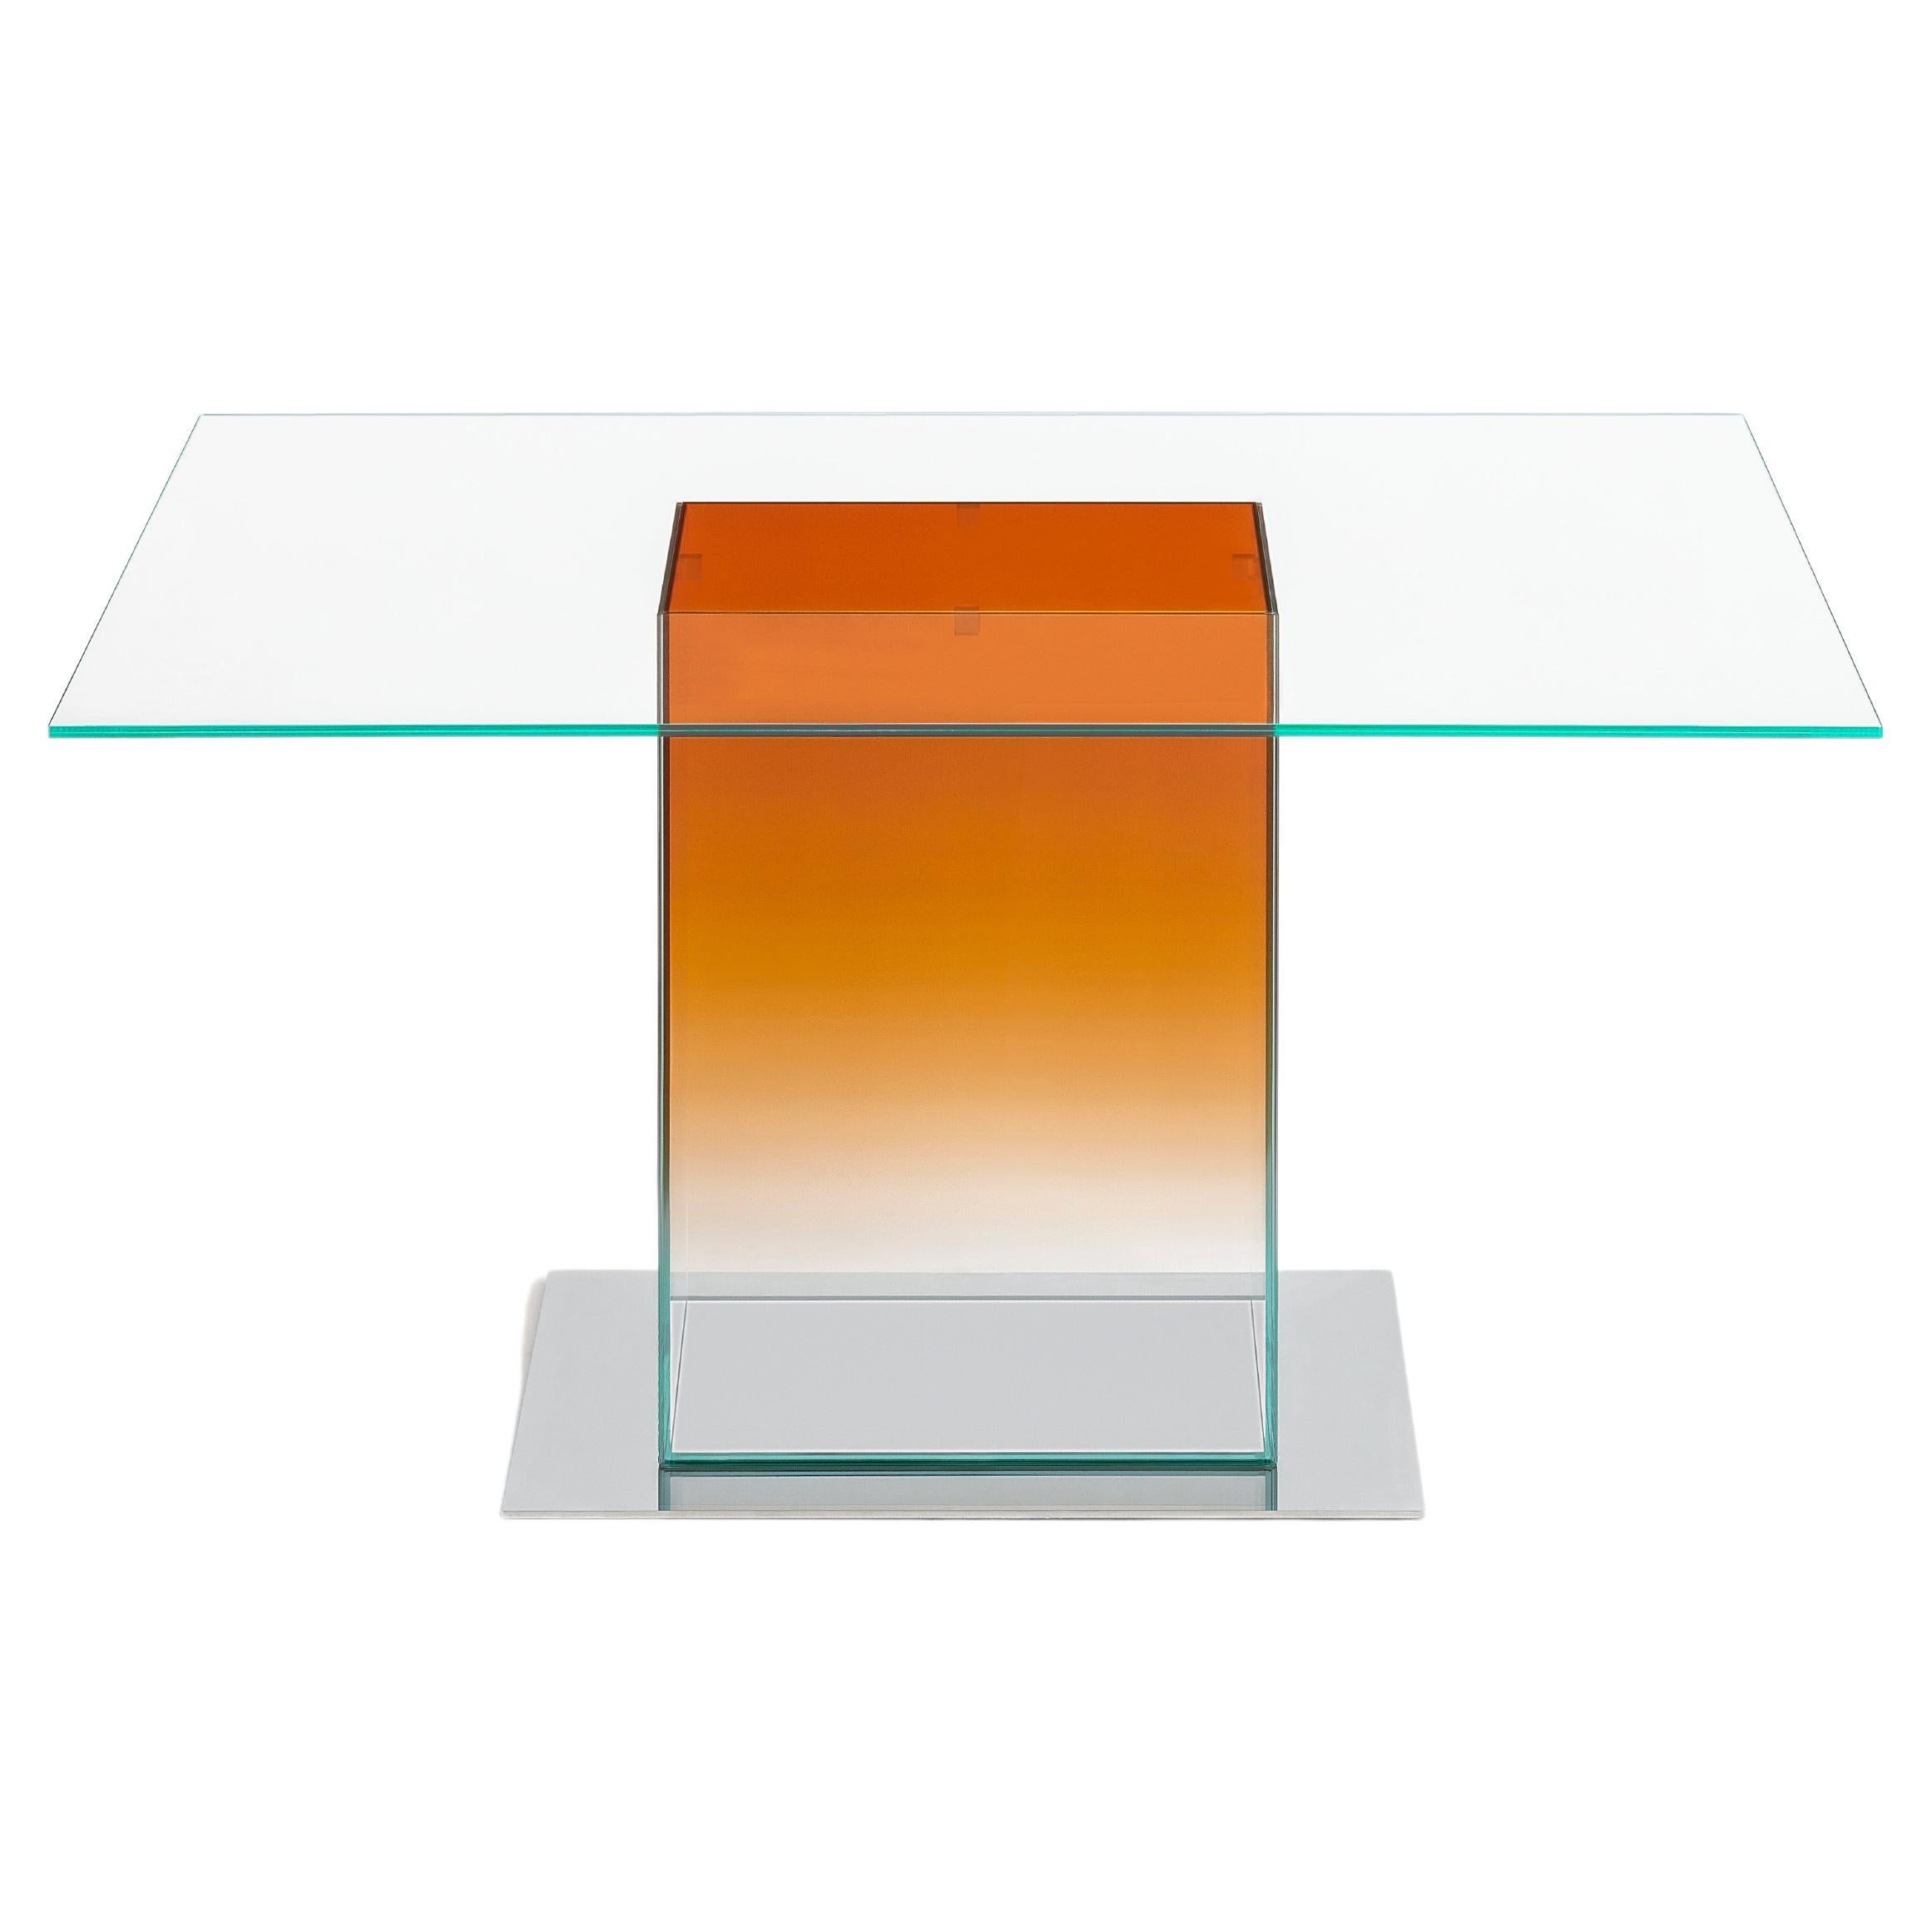 DONALD High Tables Designed by Philippe Starck for Glas Italia